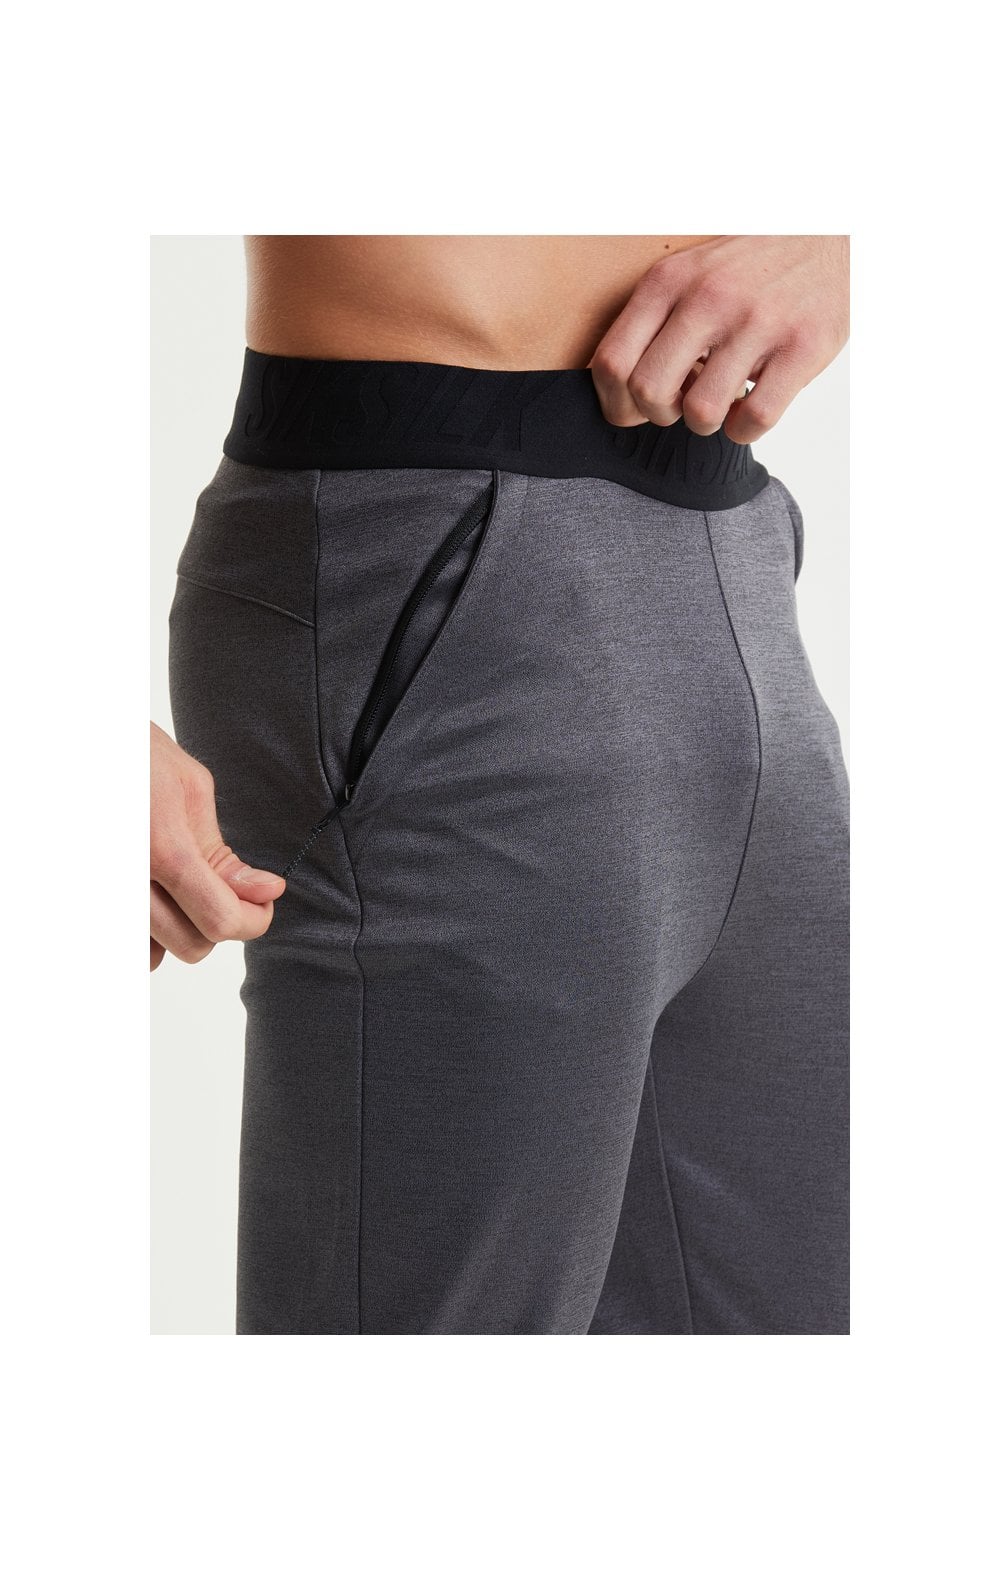 Load image into Gallery viewer, SikSilk Rapid Pants – Charcoal Marl (3)